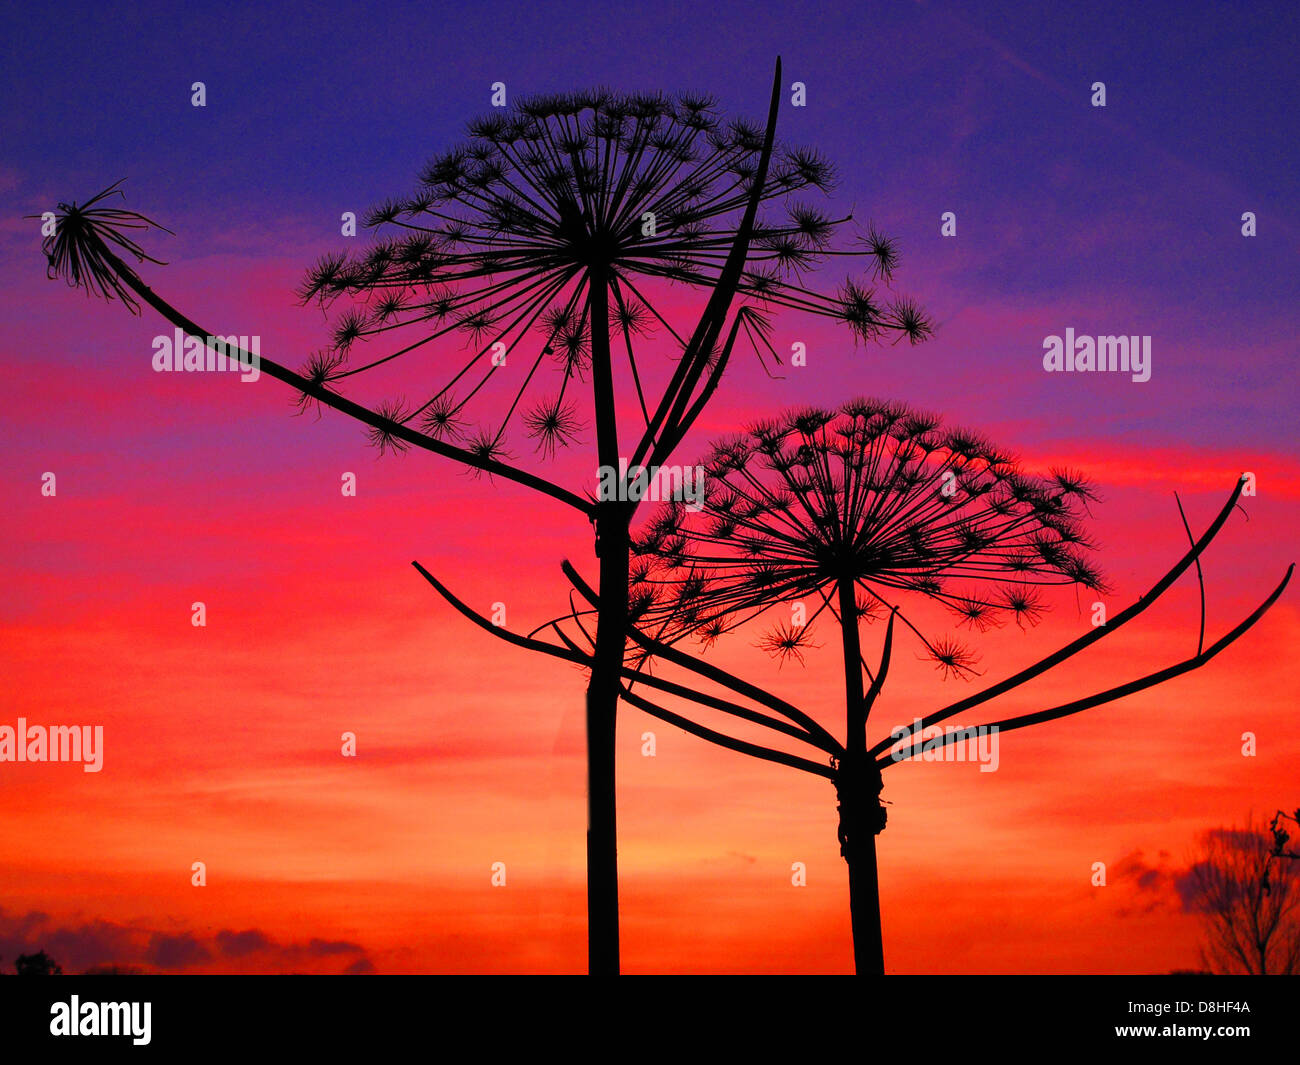 Giant Cow Parsley / giant hogweed / Heracleum mantegazzianum in a sunset silhouette, Rushgreen, Lymm, Cheshire, England, WA13 9PN Stock Photo